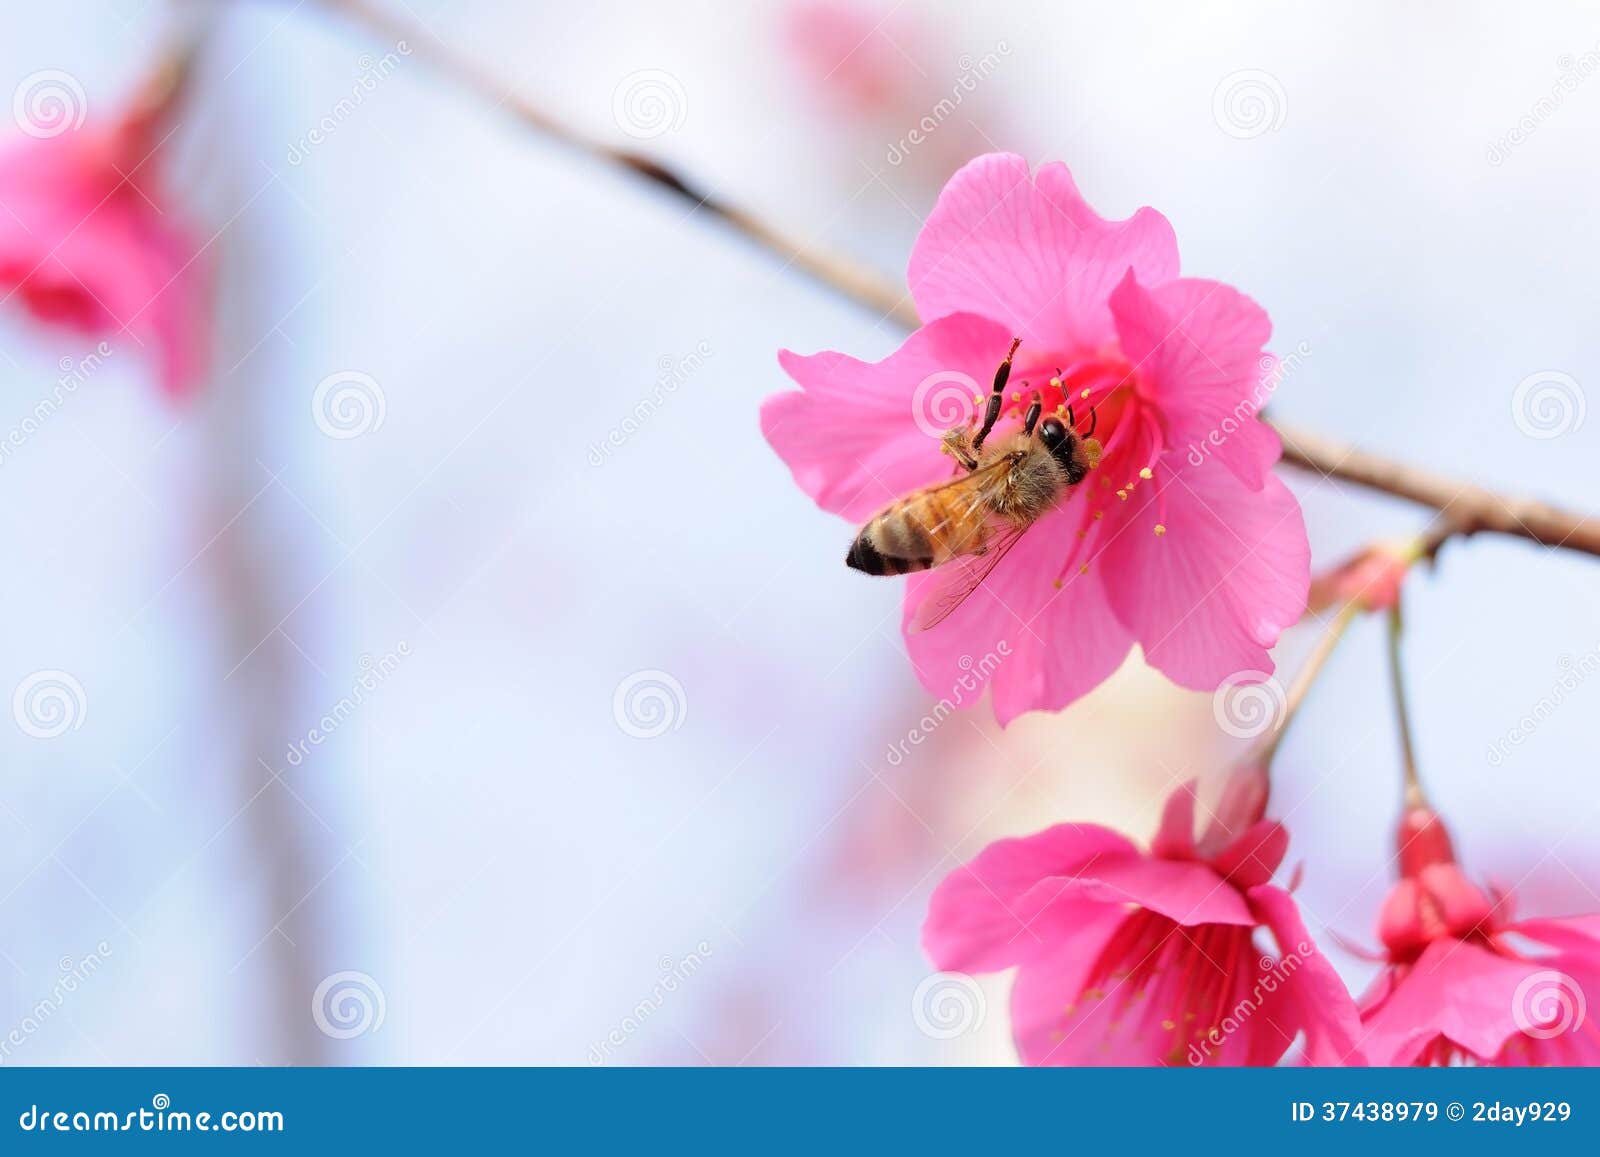 honey bee pollinating cherry blossoms. insect, flower, agriculture honeybee, beauty in nature